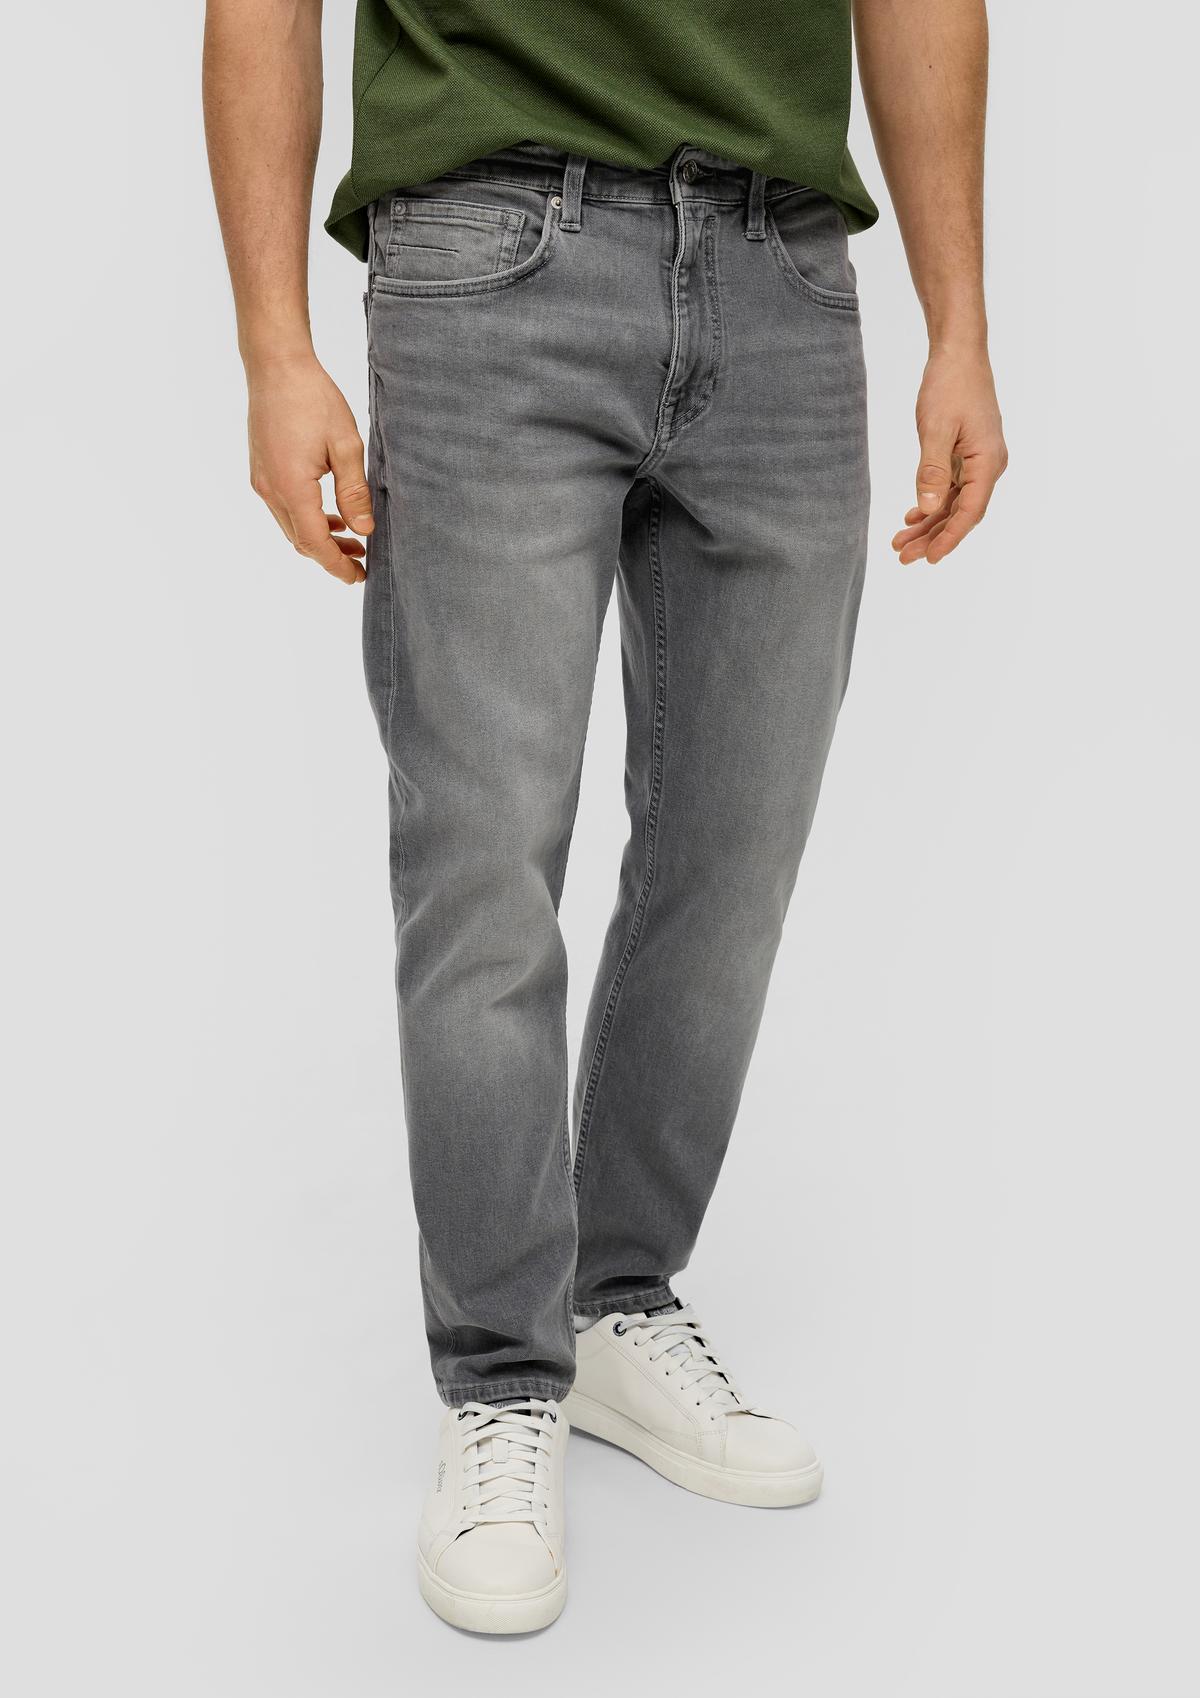 s.Oliver Mauro jeans / regular fit / mid rise / tapered leg